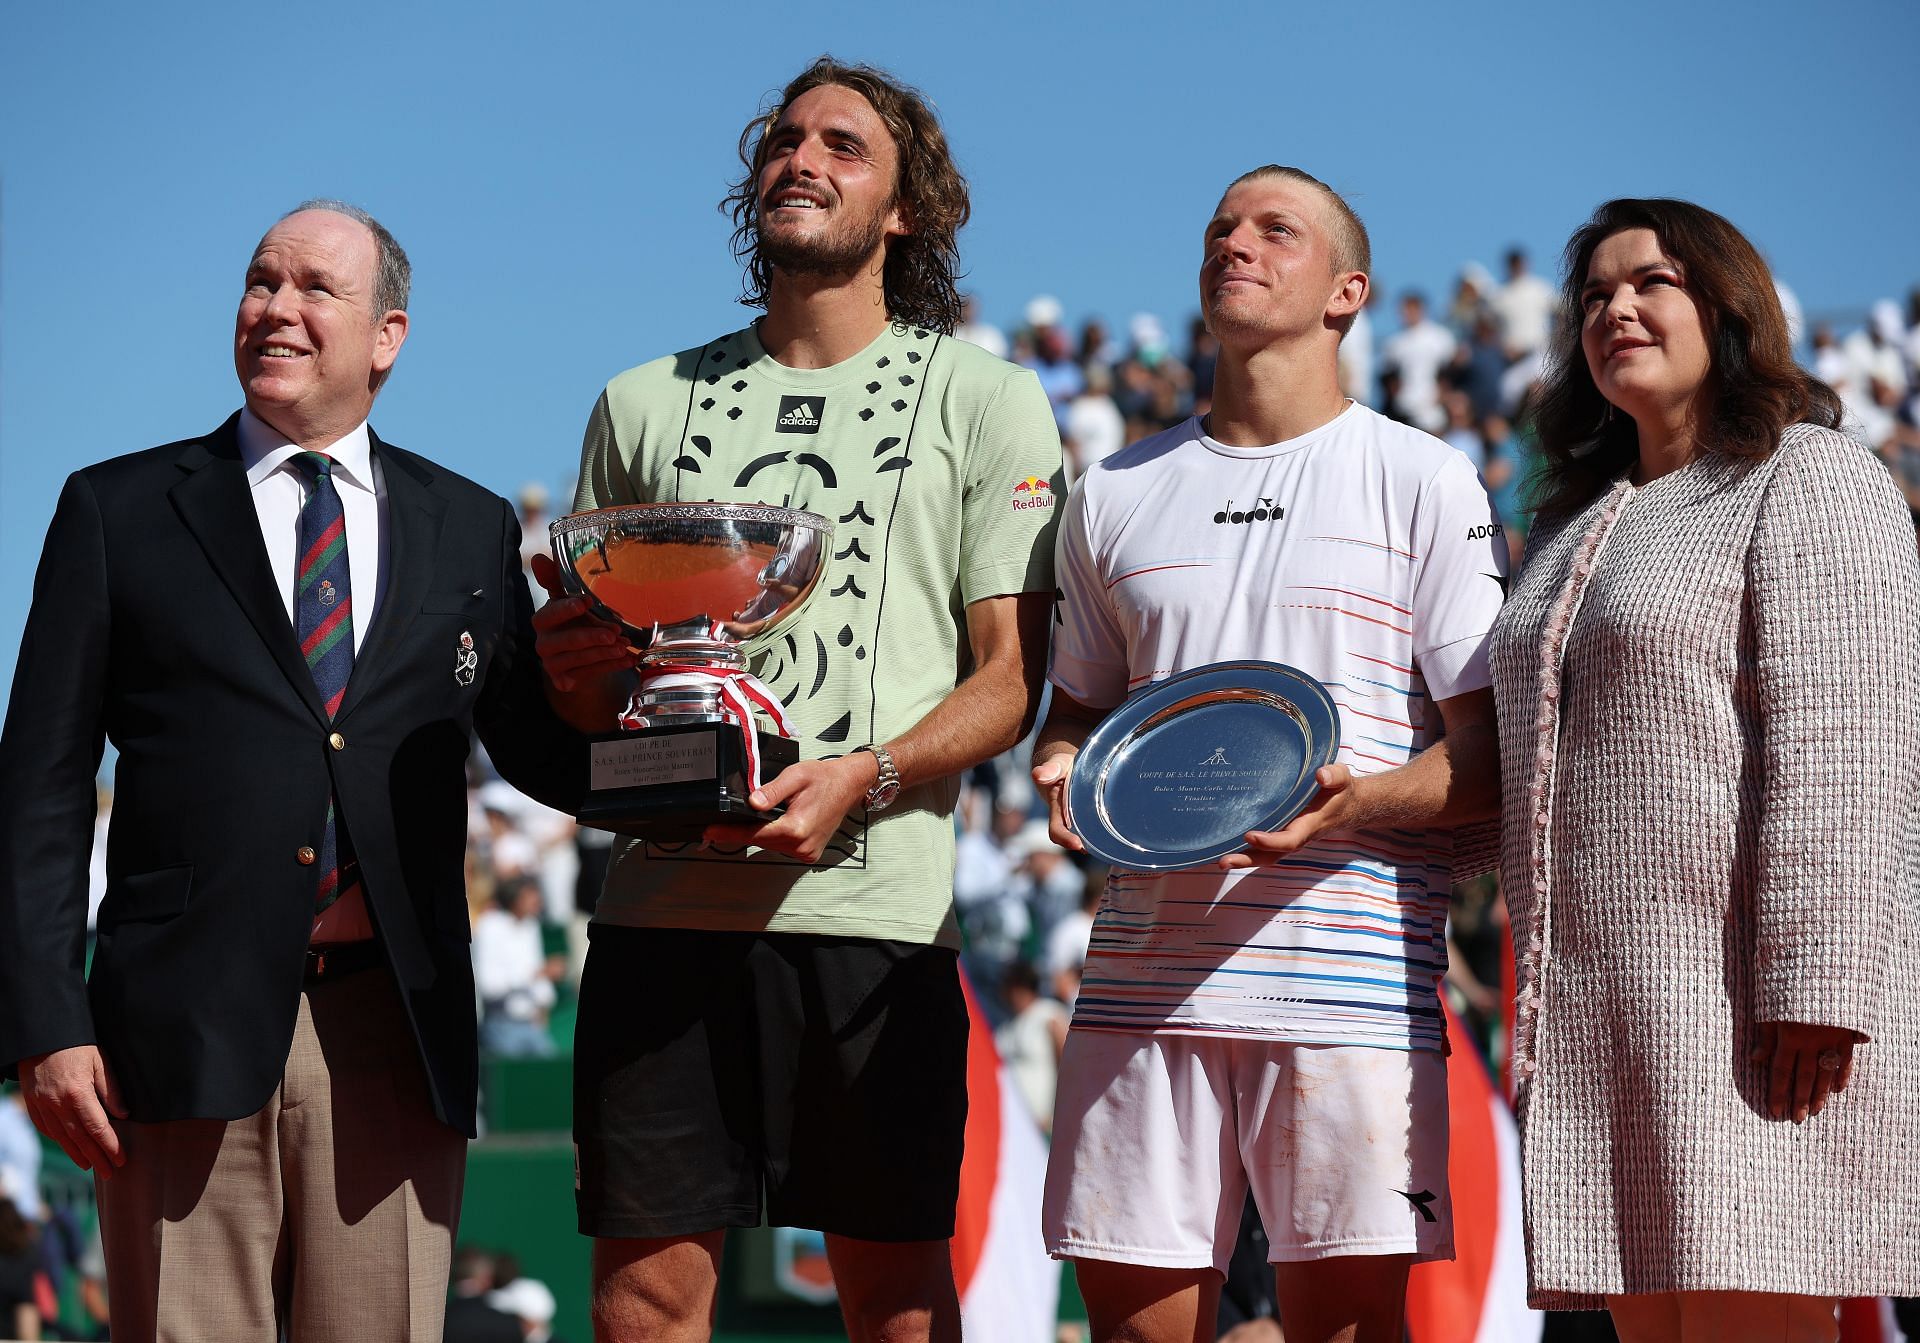 Stefsanos Tsitsipas won the Monte-Carlo Masters after beating Alejandro Davidovich Fokina in the final